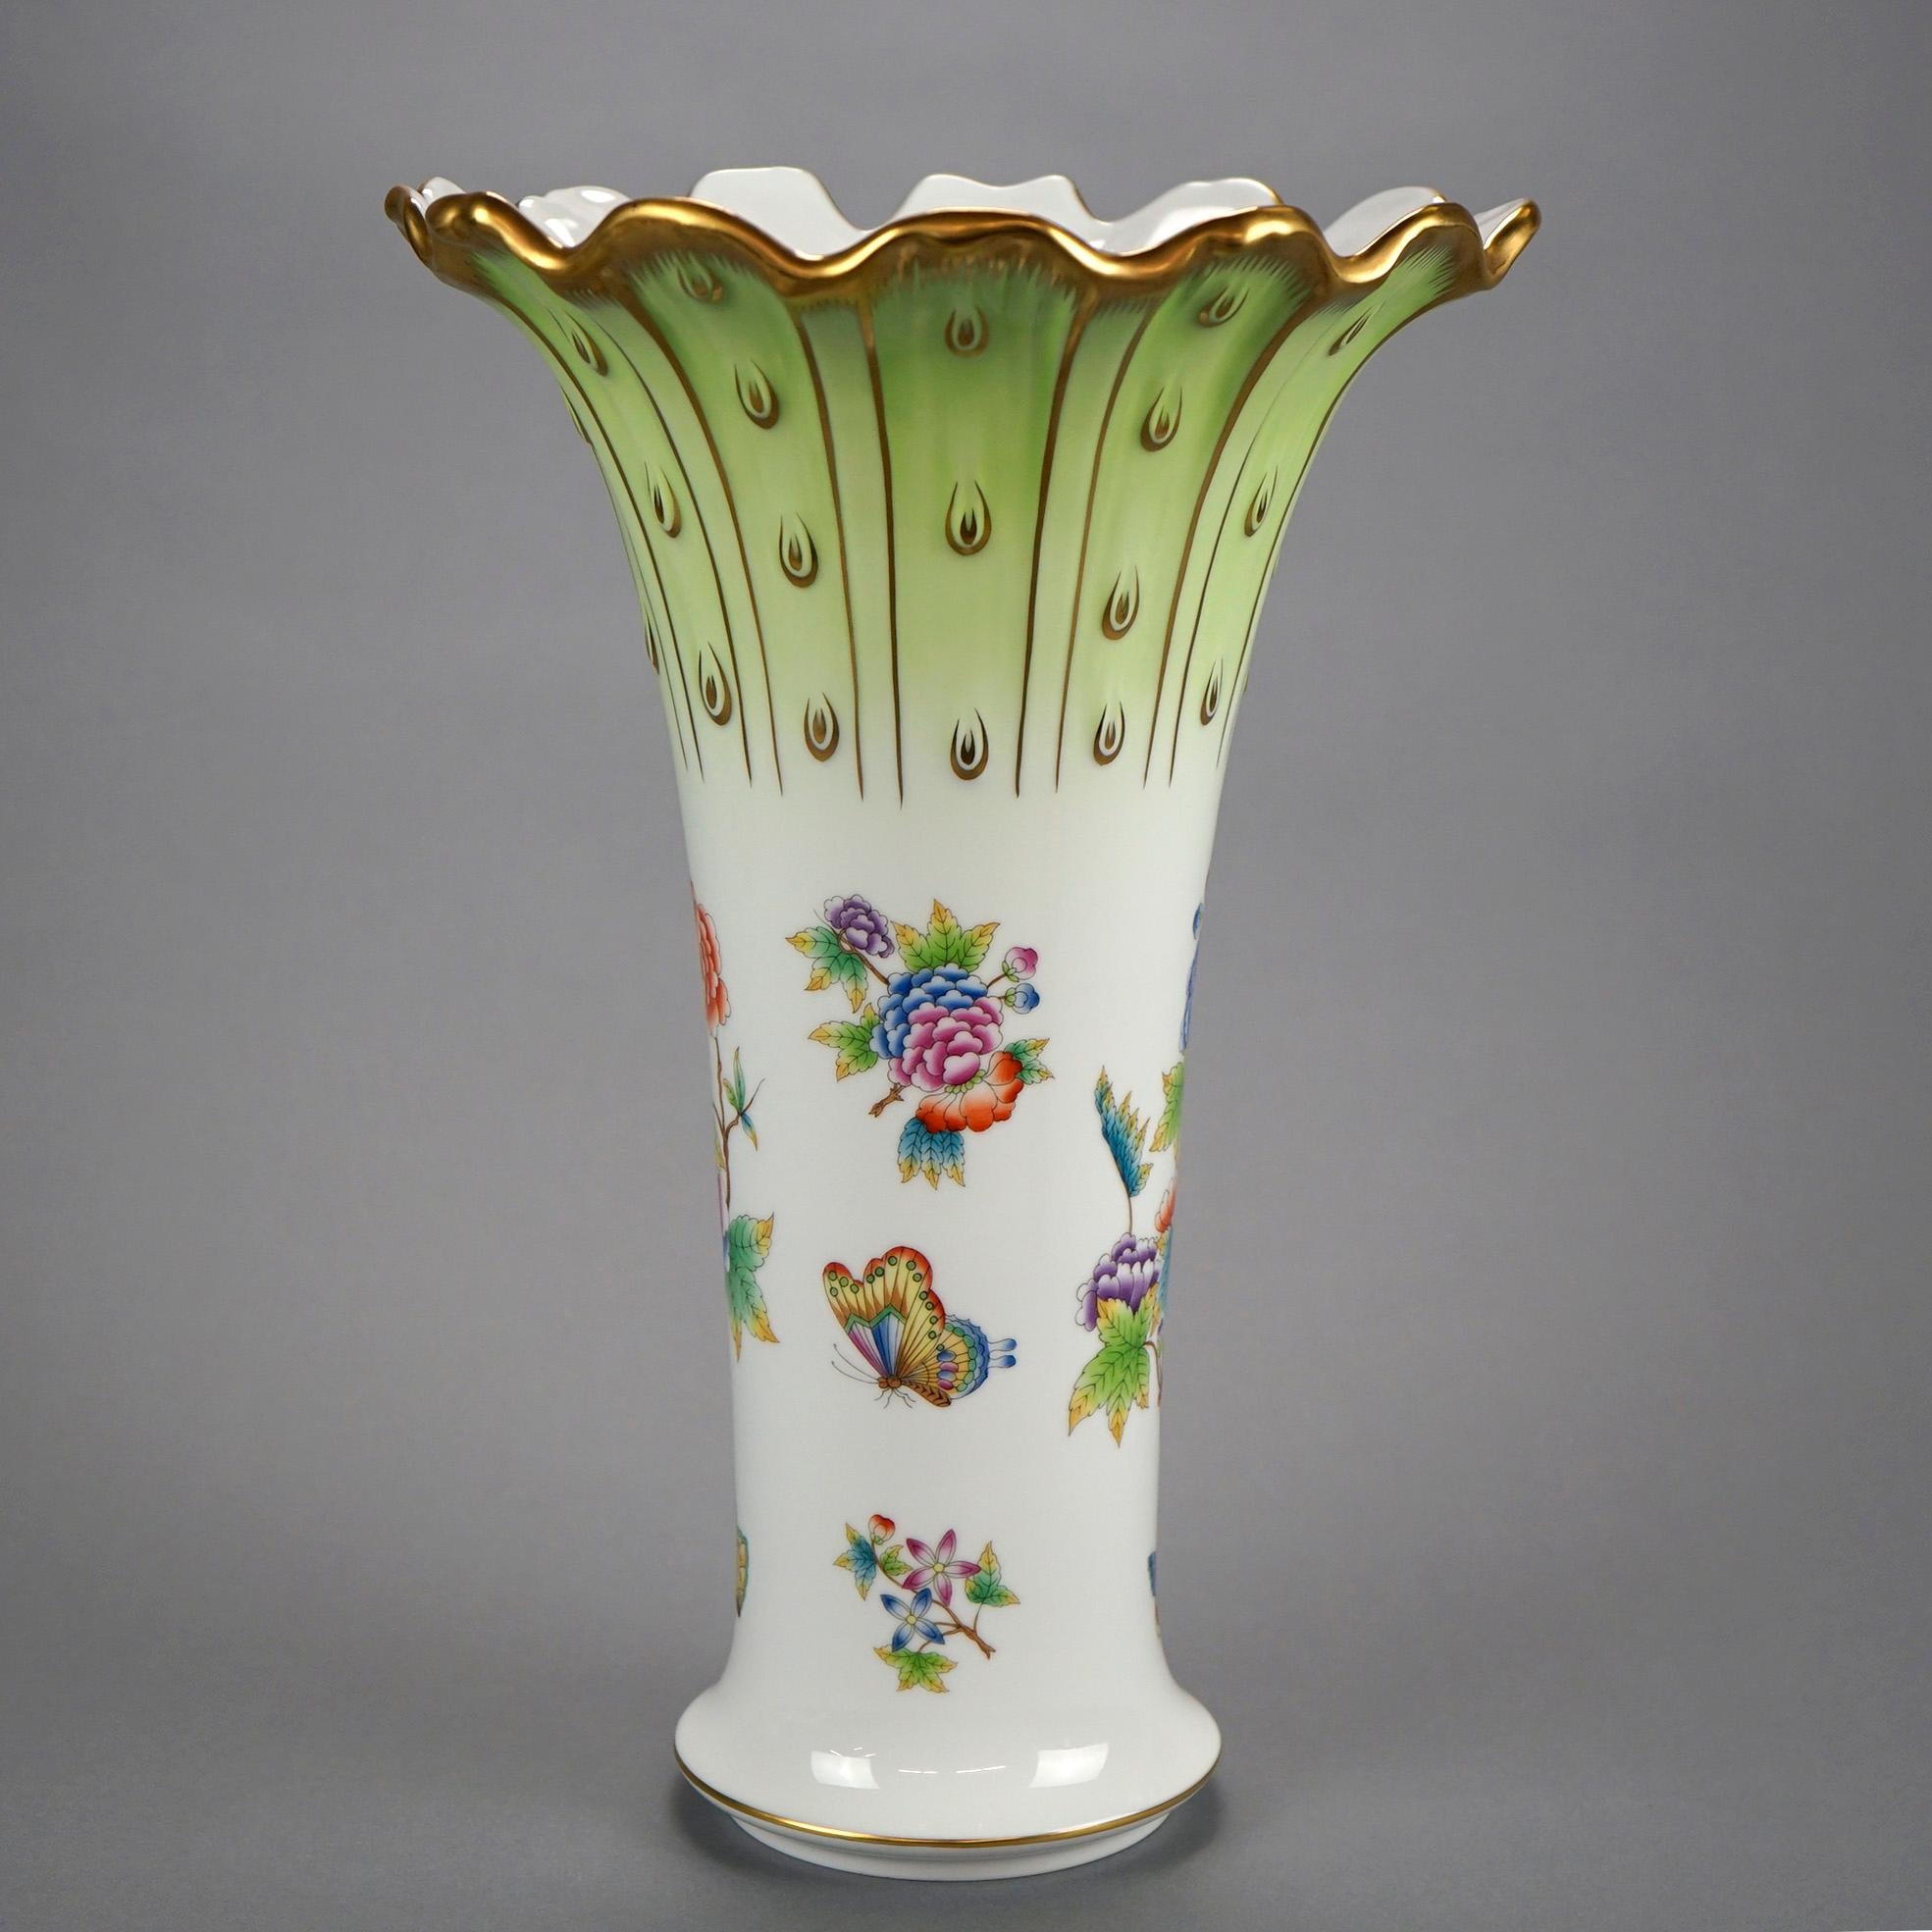 A large vase by Herend offers porcelain construction ;in flared form having ruffled rim and painted garden flowers with butterfly, gilt highlights throughout, maker mark on base as photographed, 20th century

Measures- 14.5''H x 9.5''W x 9.5''D.